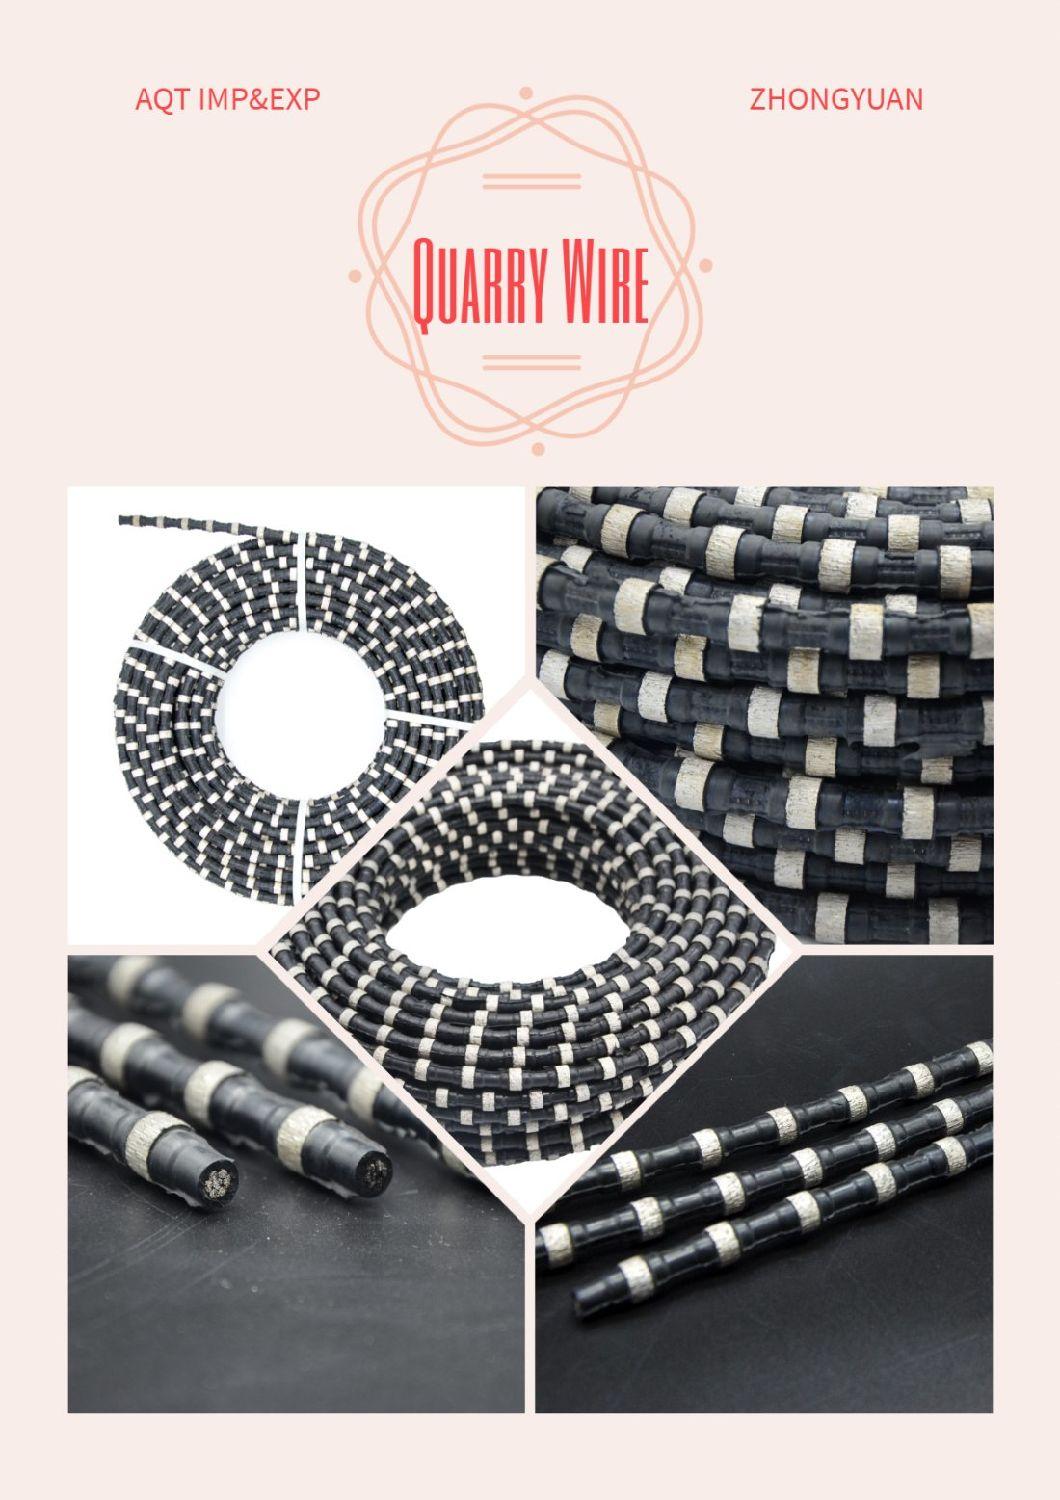 Diamond Wire Saw for Granite Quarrying